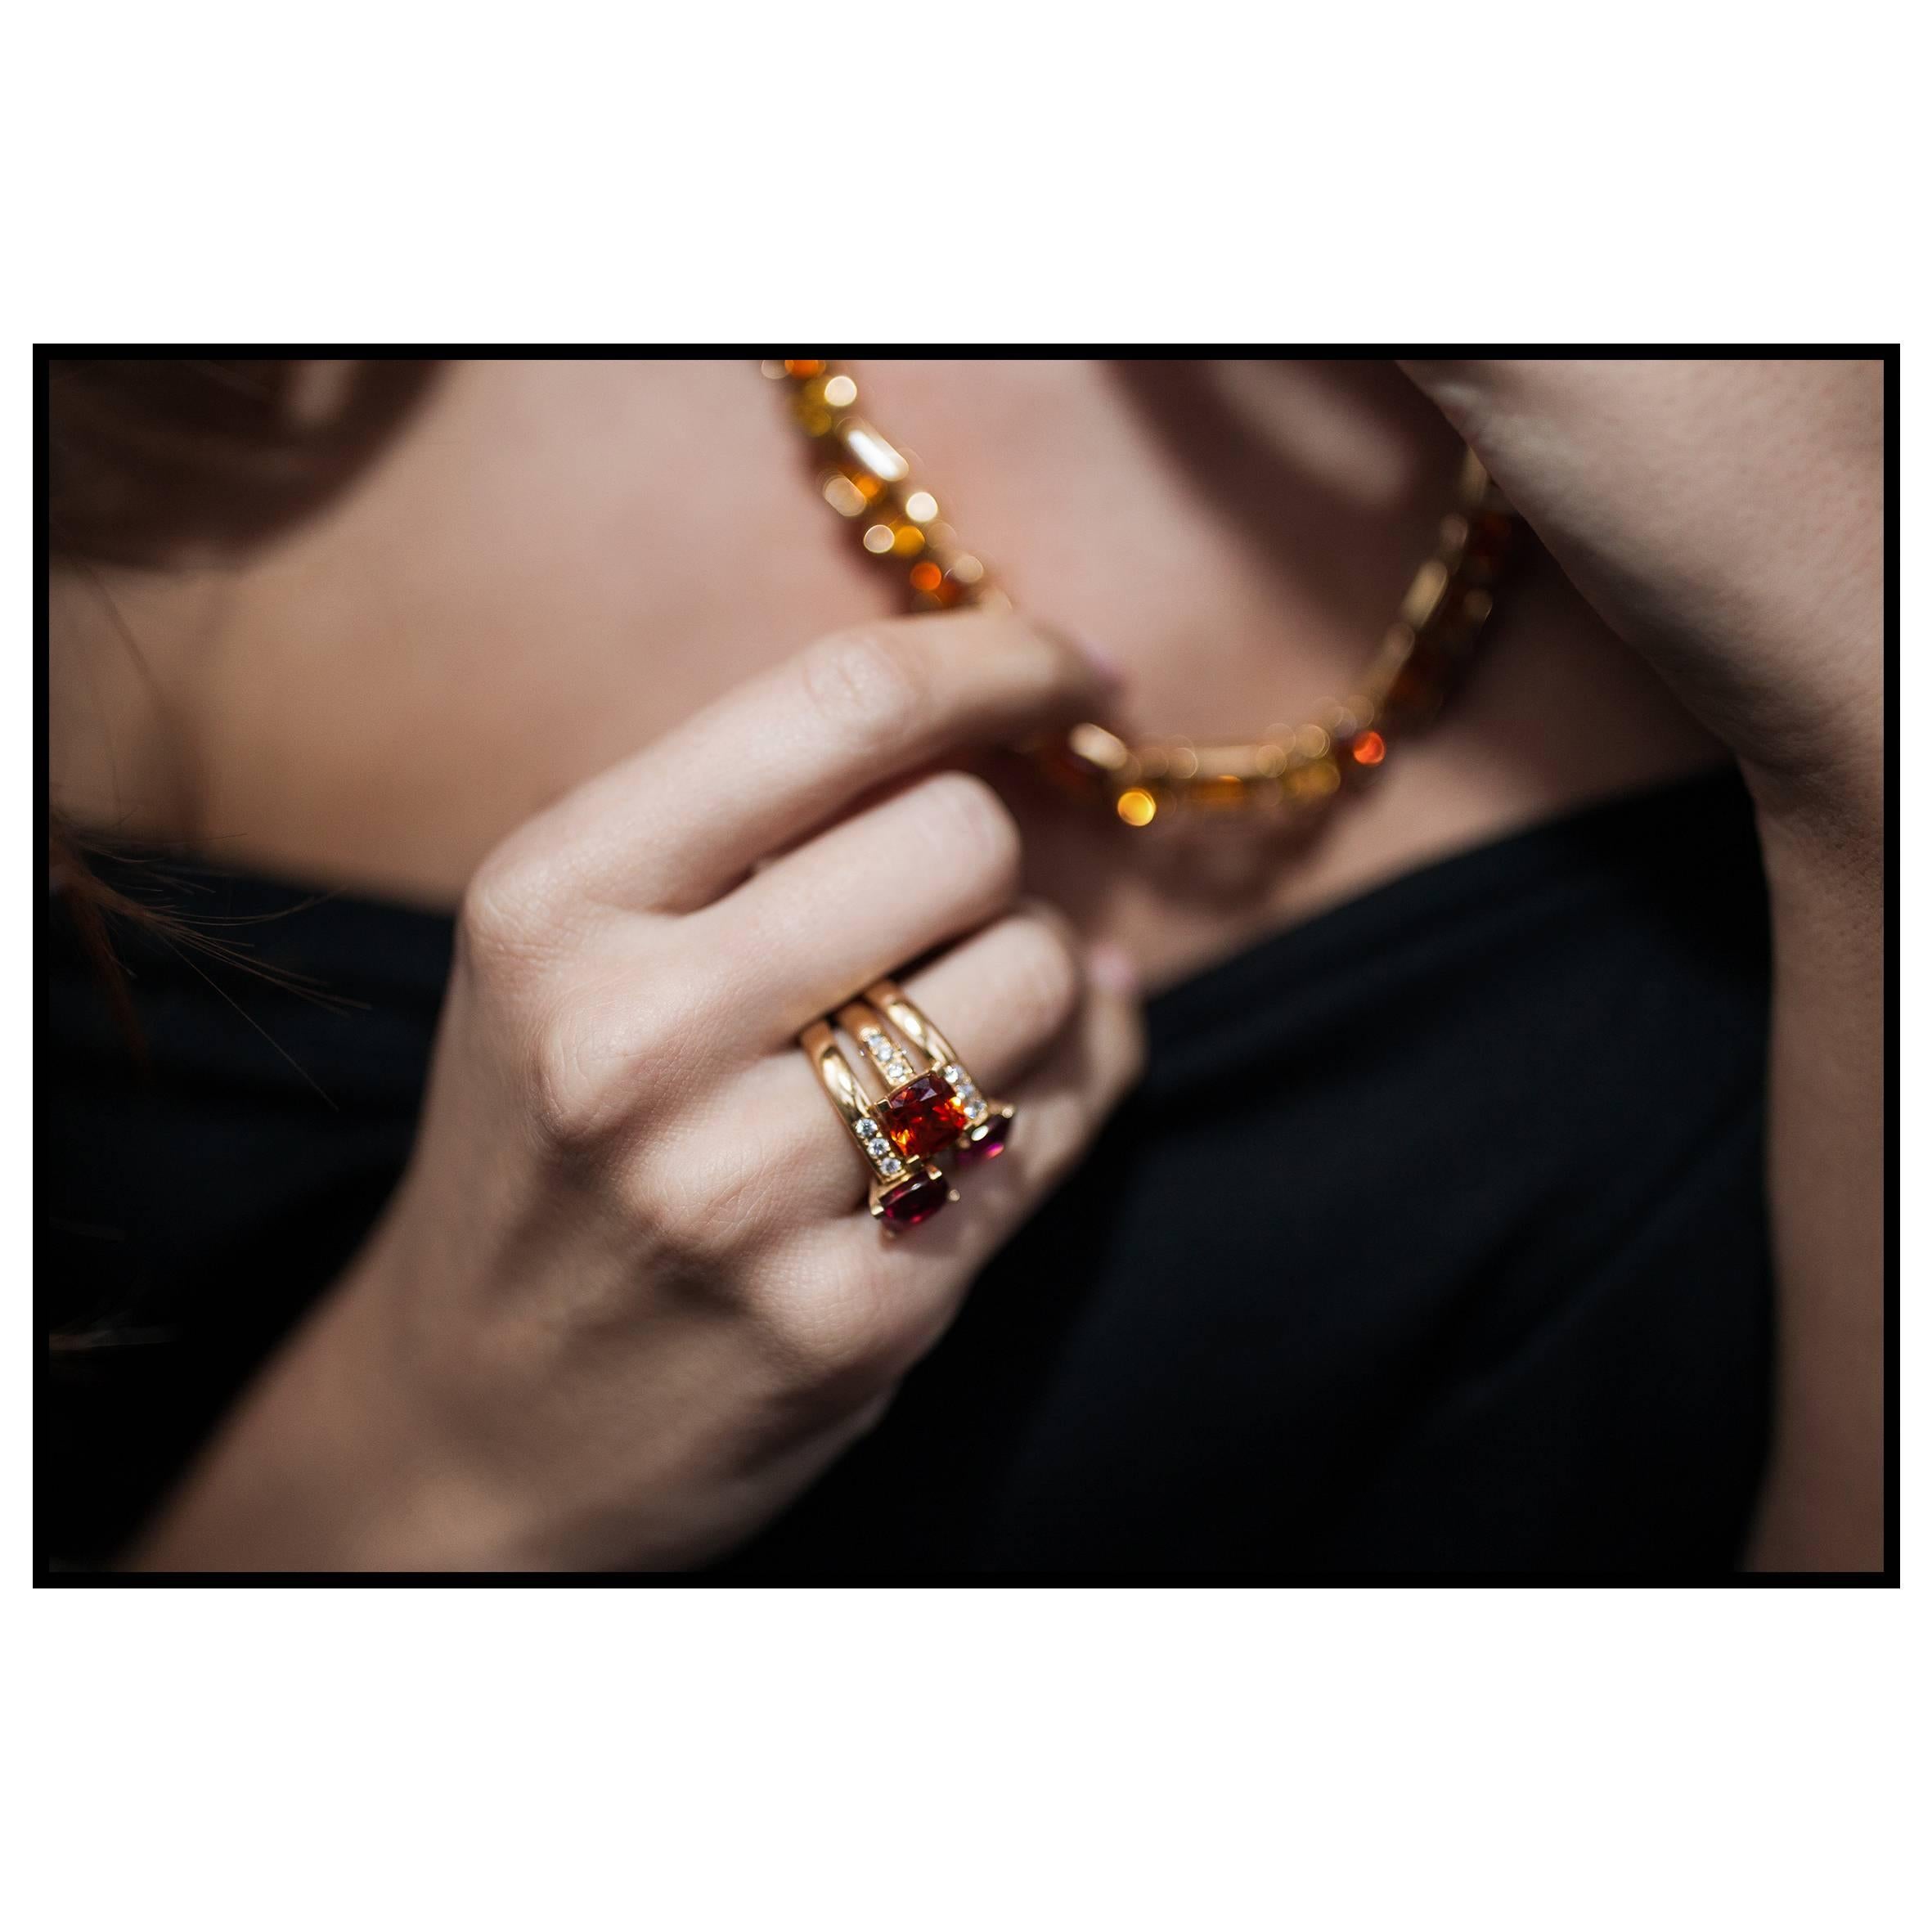 Thomas Leyser is renowned for his contemporary jewellery designs utilizing fine gemstones.

This 18k rose gold bracelet contains 21 top quality, faceted citrines in different shapes and colours (18,02ct). There are 2 bracelets available. They could